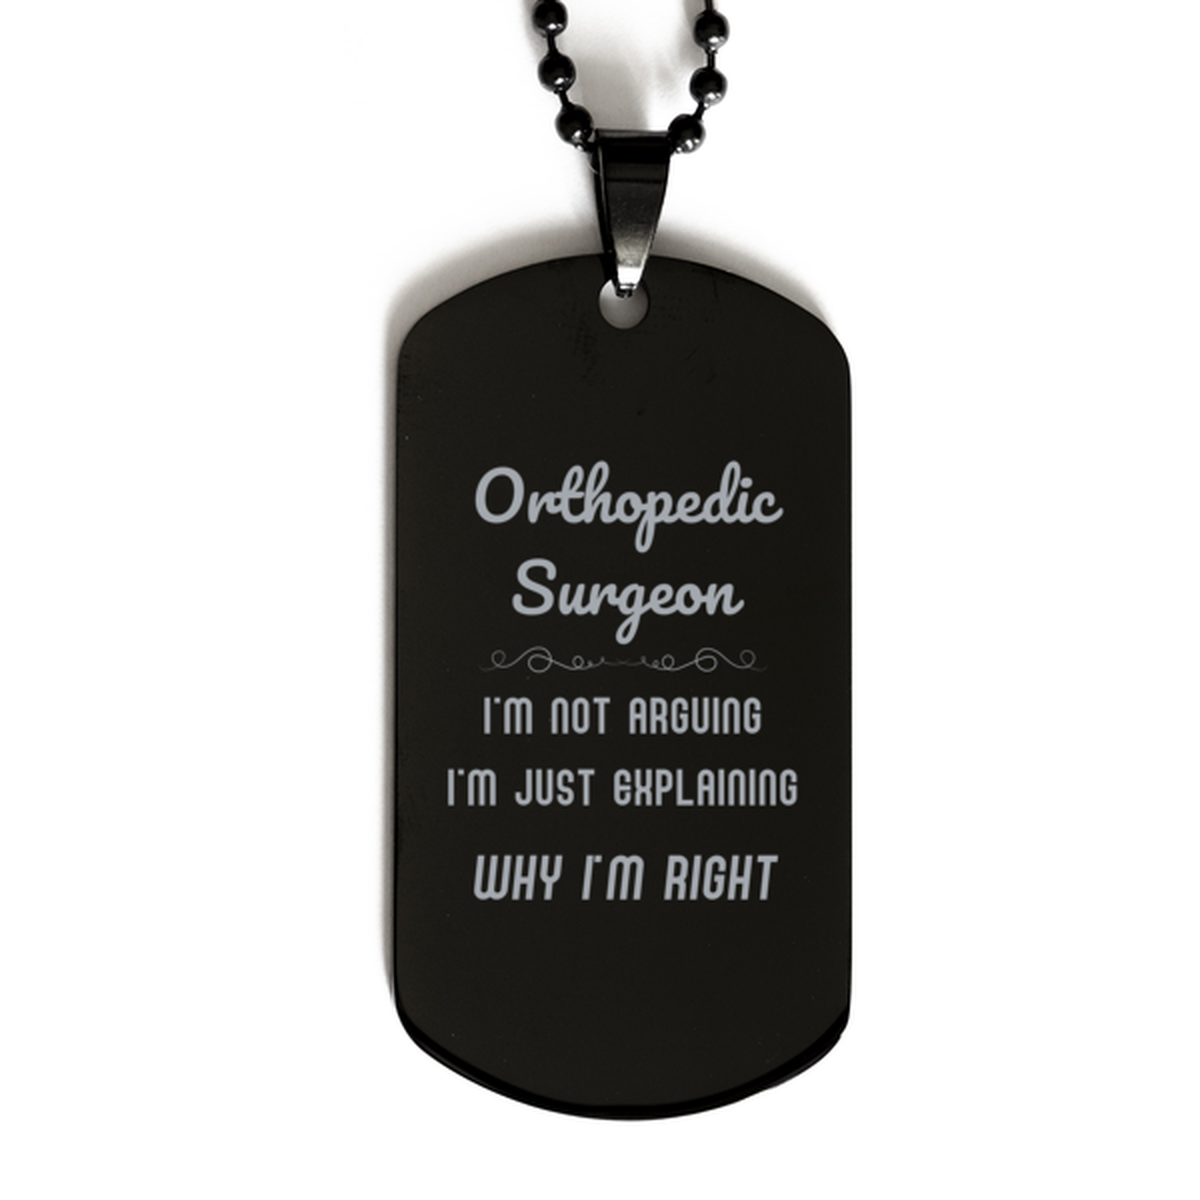 Orthopedic Surgeon I'm not Arguing. I'm Just Explaining Why I'm RIGHT Black Dog Tag, Funny Saying Quote Orthopedic Surgeon Gifts For Orthopedic Surgeon Graduation Birthday Christmas Gifts for Men Women Coworker